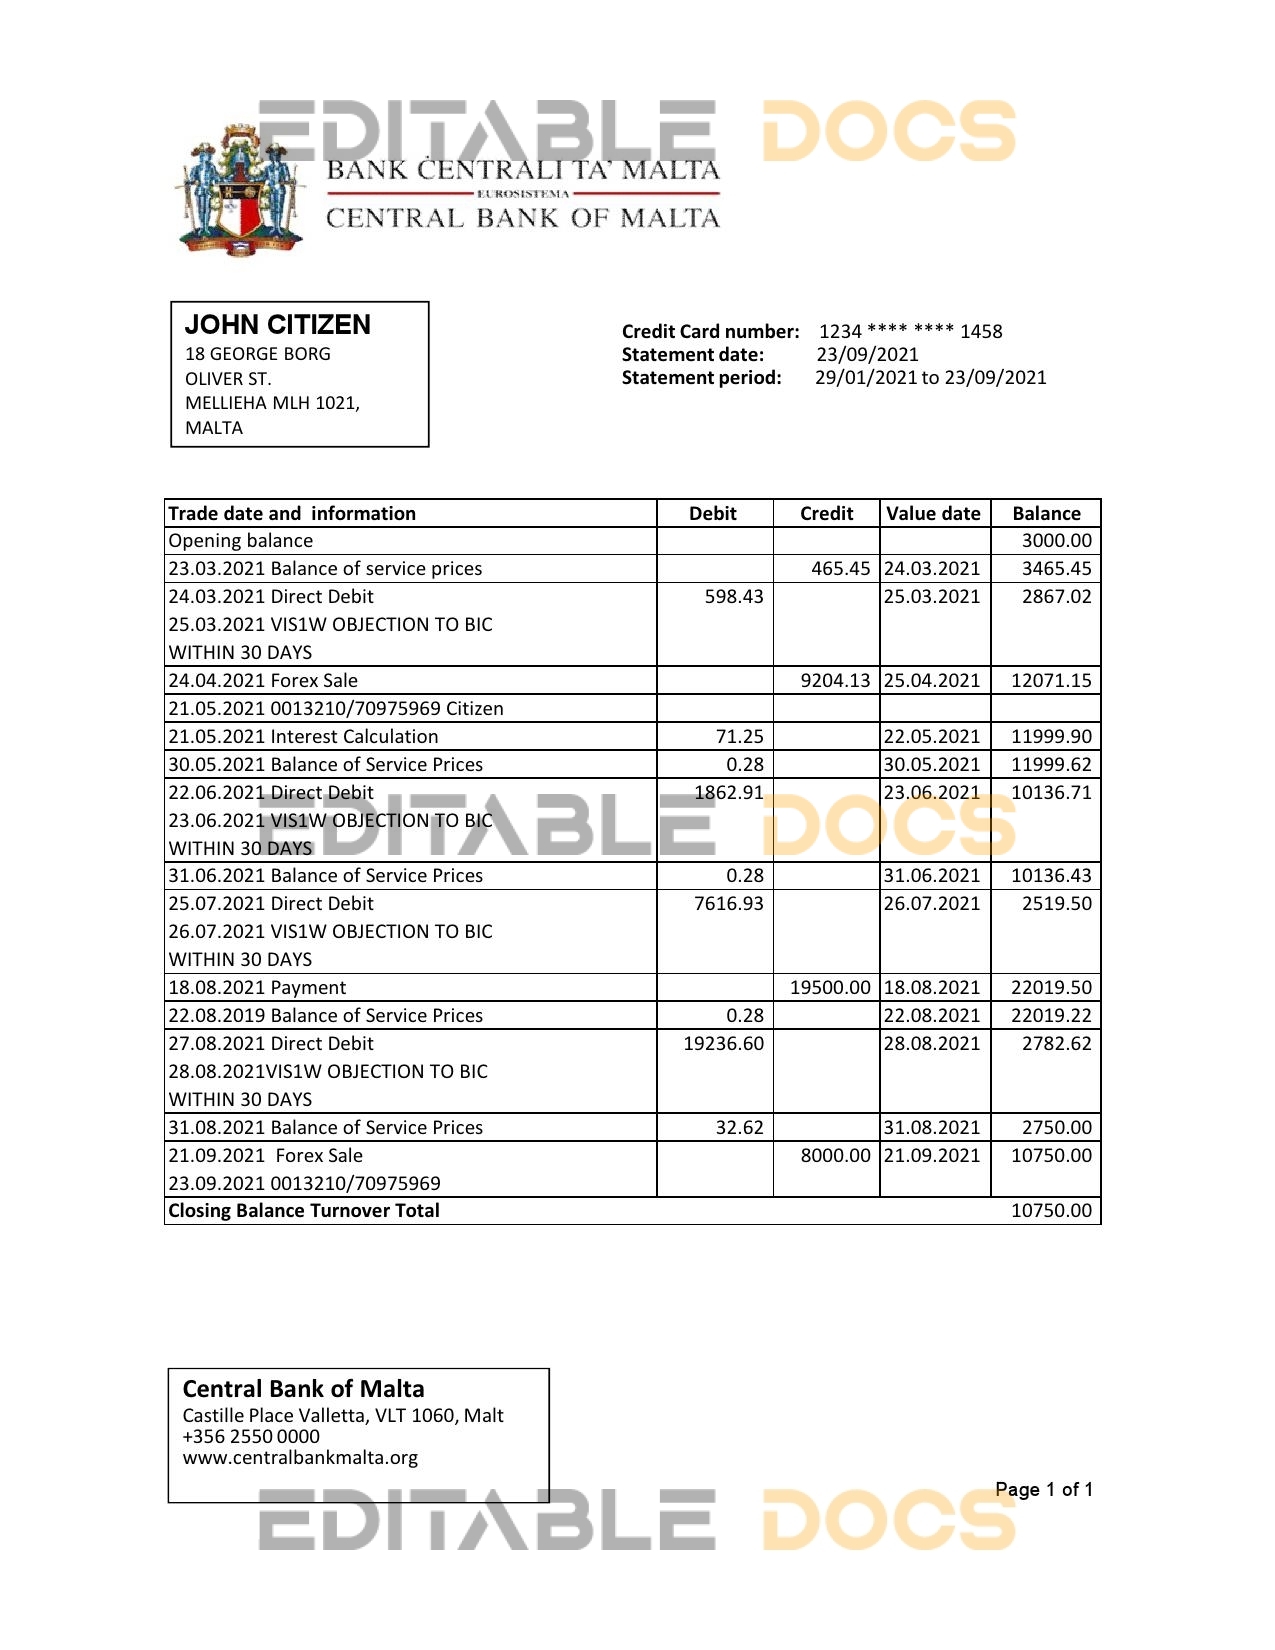 Malta Central Bank of Malta bank statement easy to fill template in Excel and PDF format